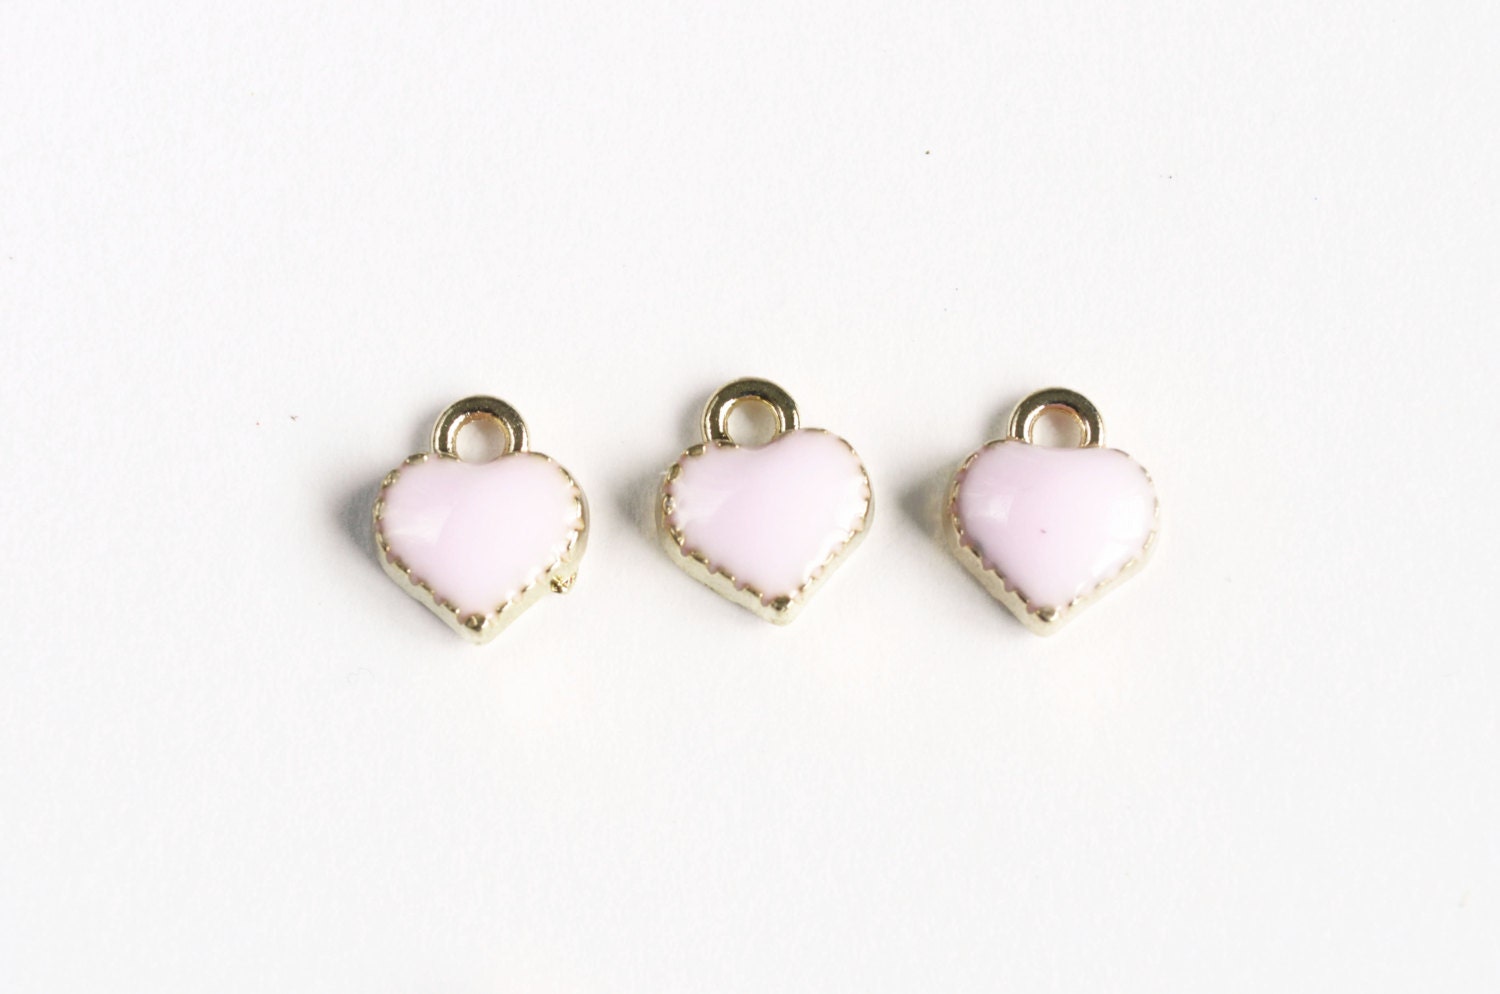 Tiny Red Heart Charms Enamel Over Gold Plating 10 Pieces - Etsy